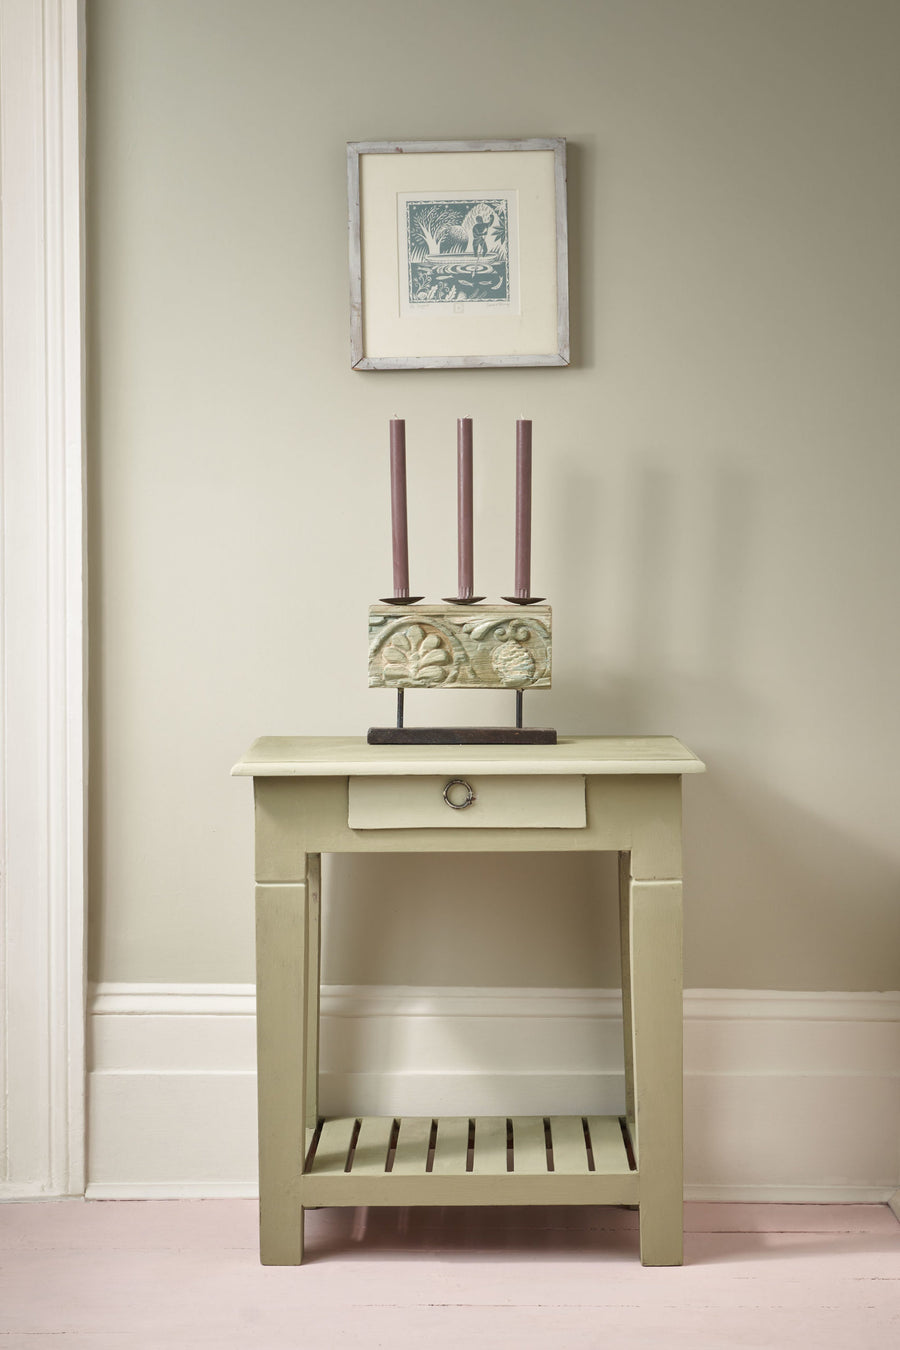 Annie Sloan Cotswold Green Wall Paint